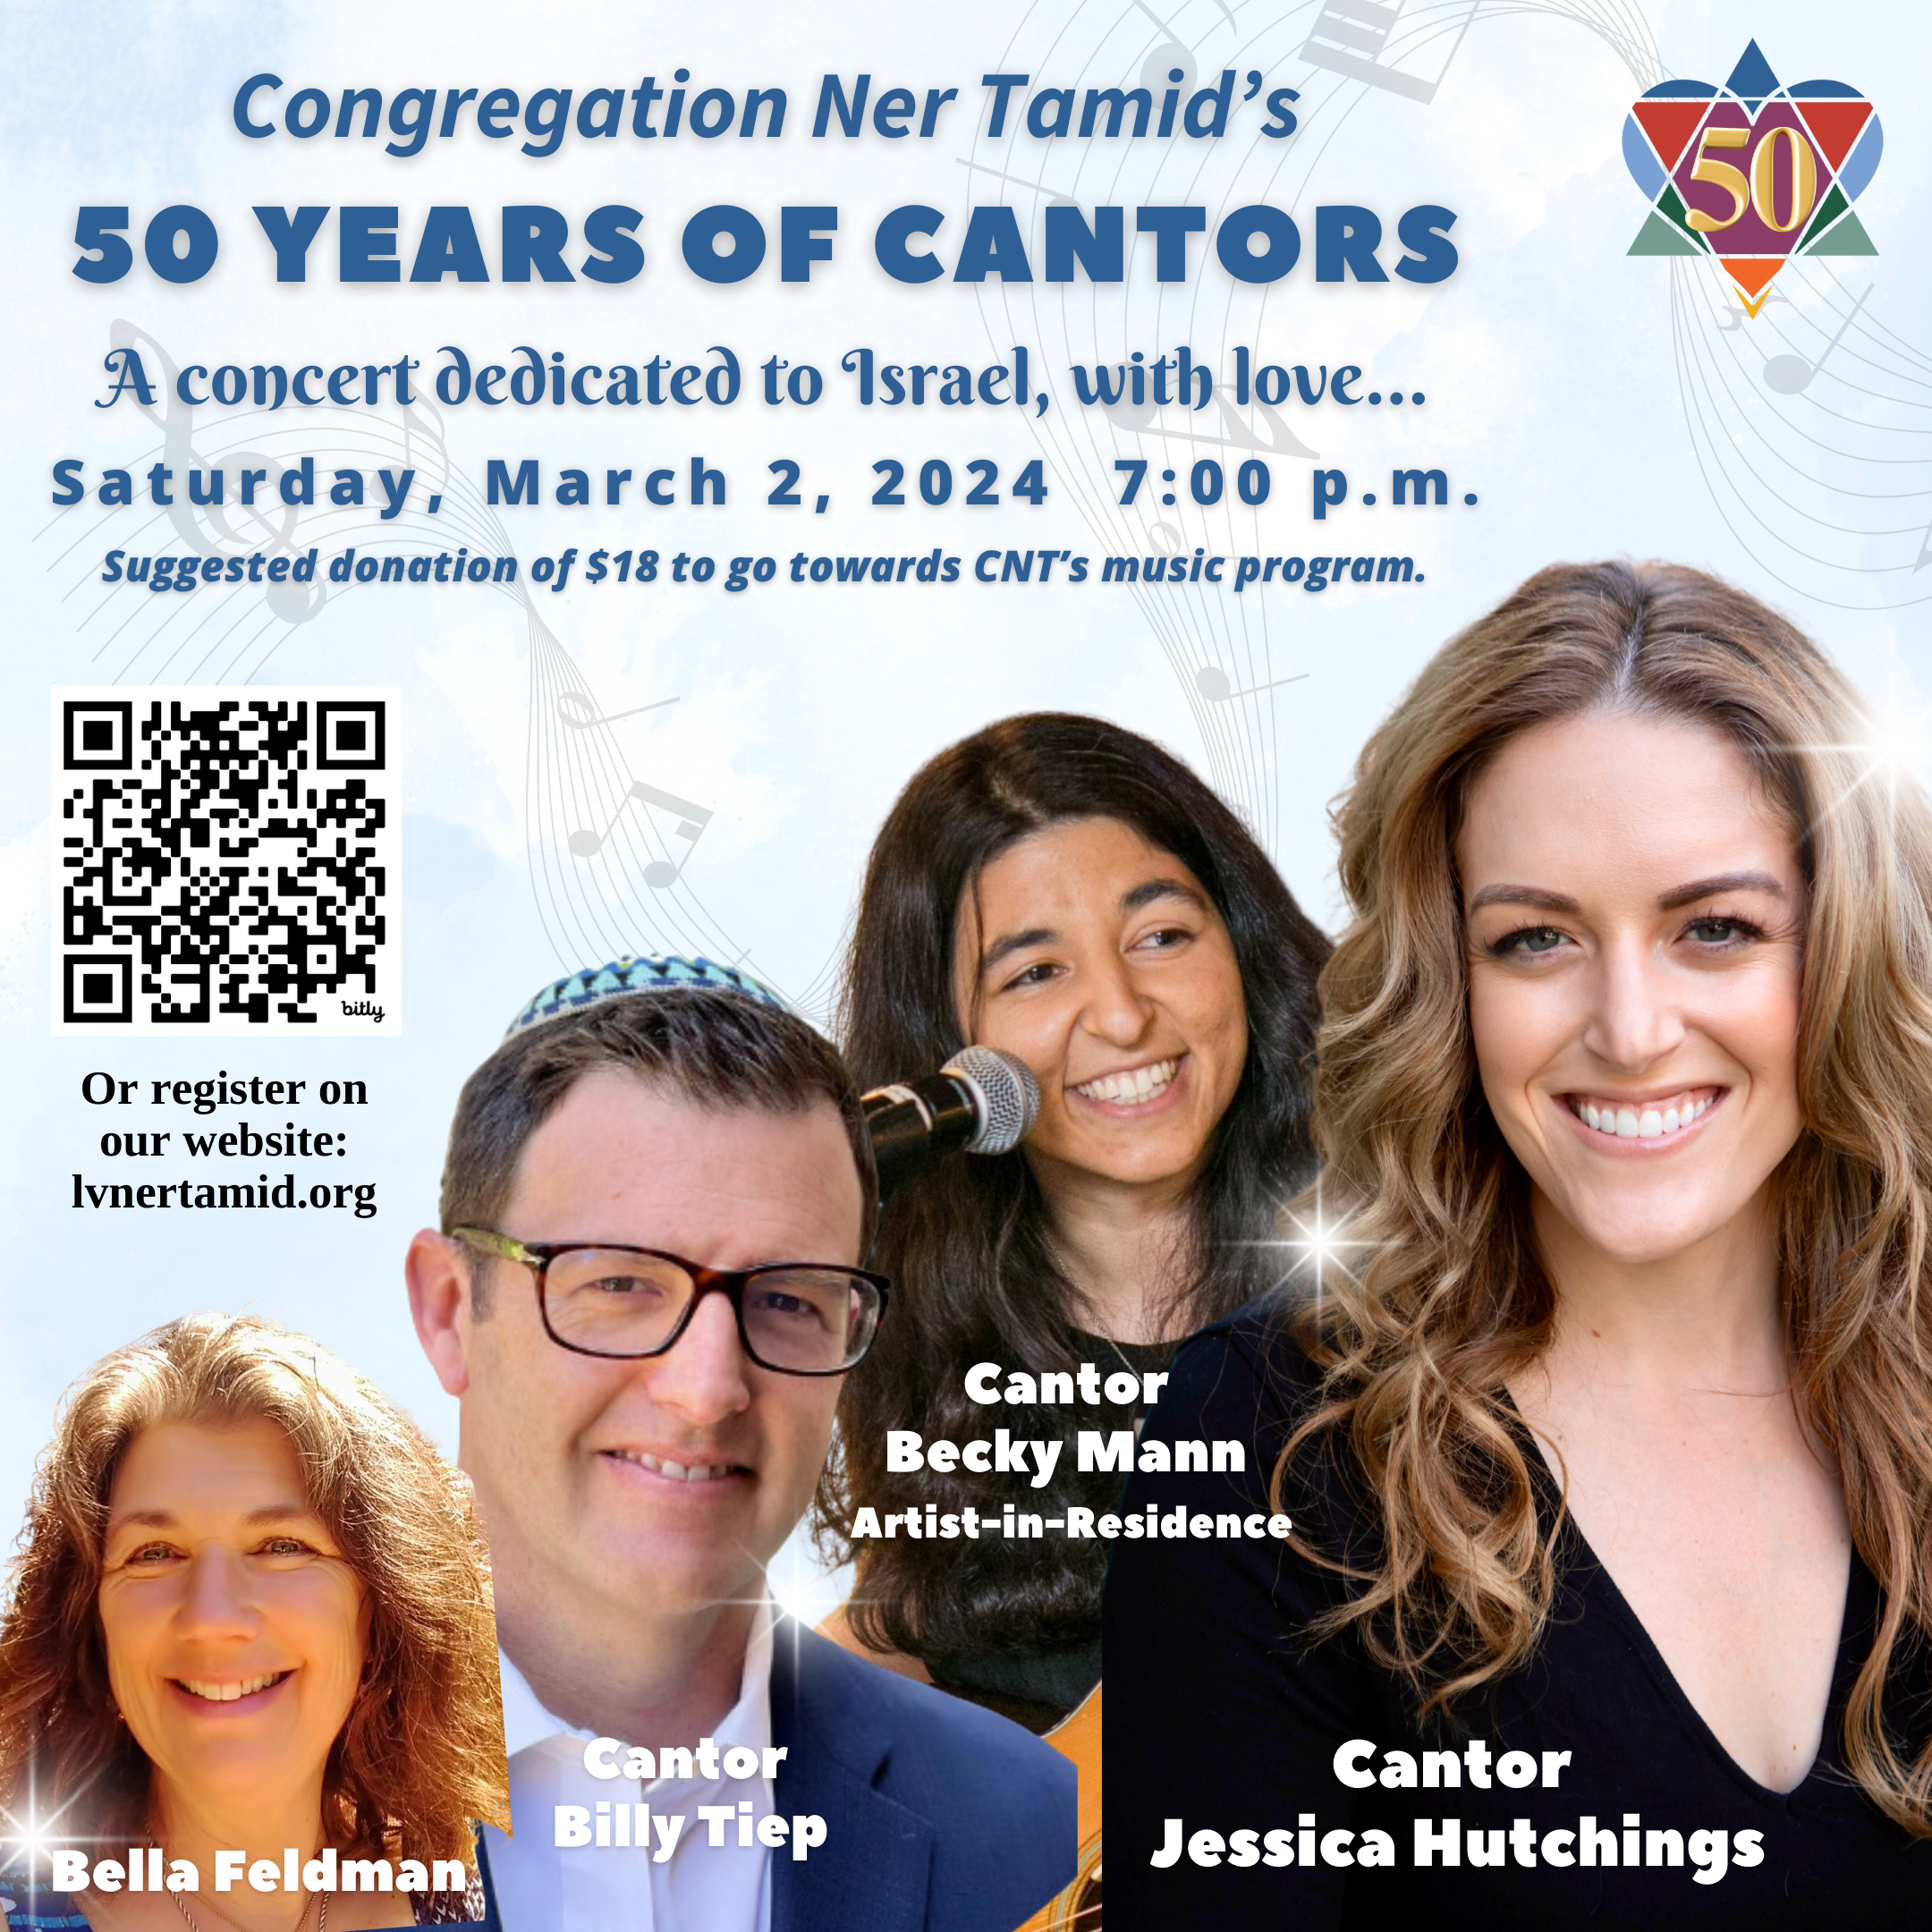 50 YEARS OF CANTORS - A CONCERT DEDICATED TO ISRAEL, WITH LOVE...